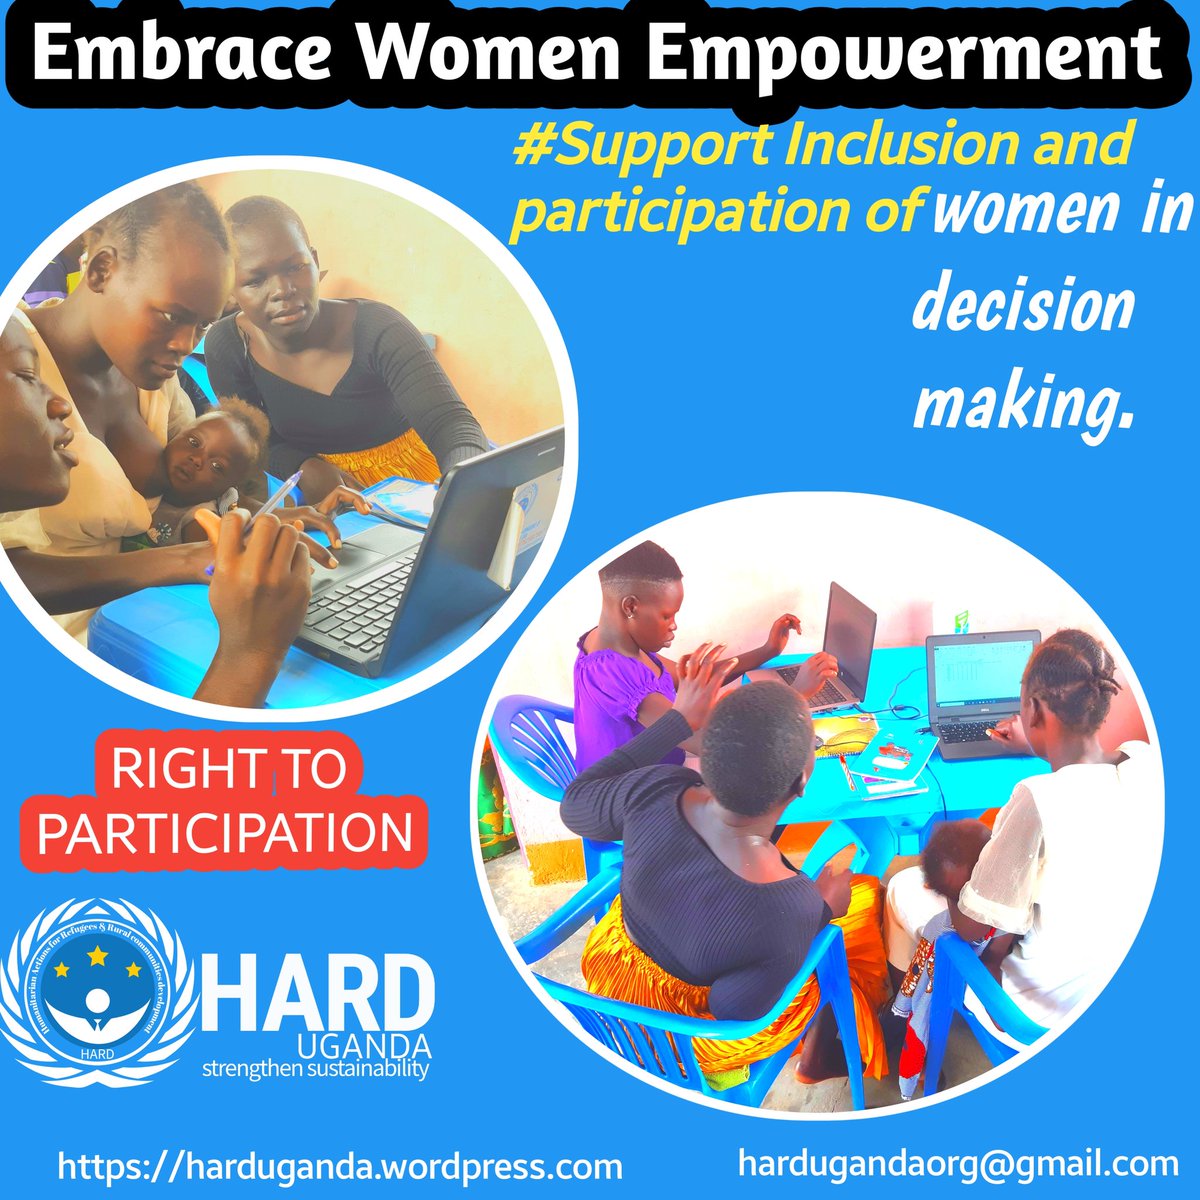 Igniting women Inclusion and participation in decision making in the society to enhance social justice and gender equality. It's our continuous campaign to embrace Equality. @AYDLinkUg @Ugandayouthpla2 @c4cworking